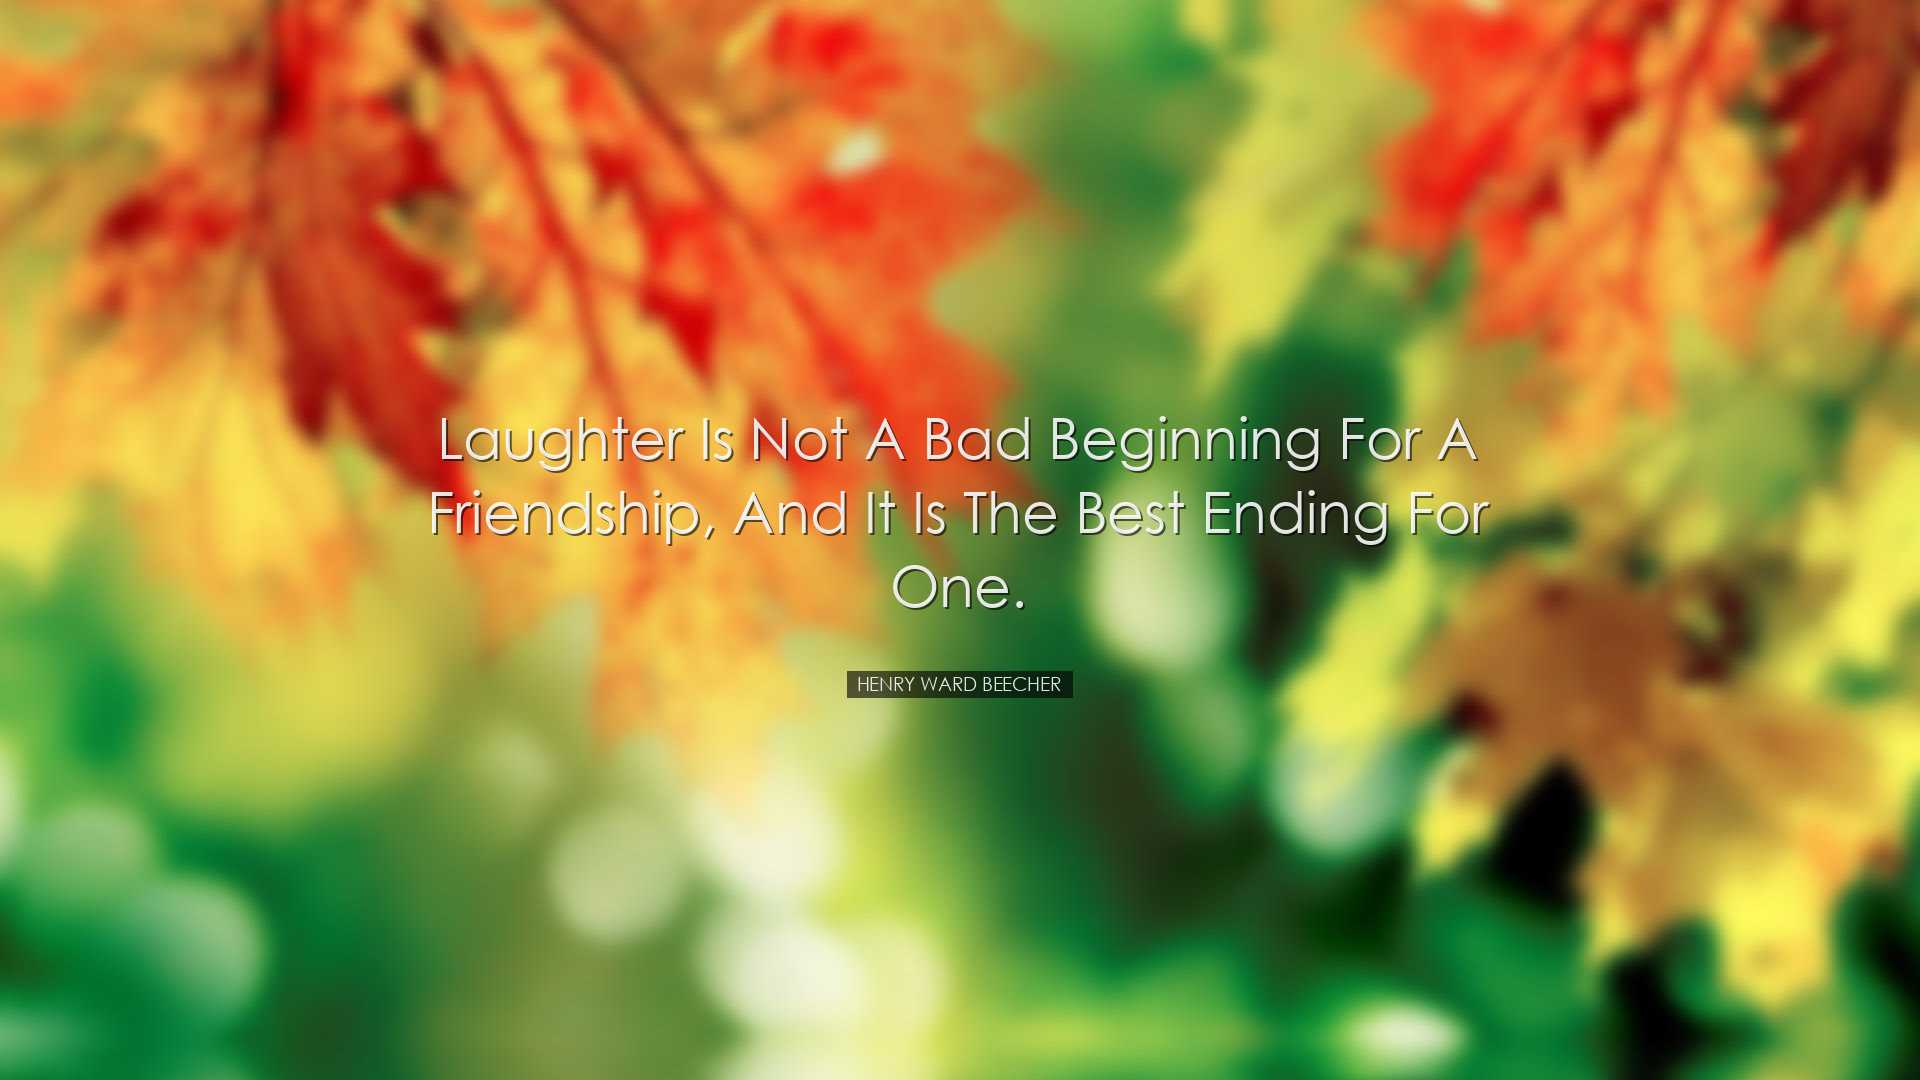 Laughter is not a bad beginning for a friendship, and it is the be